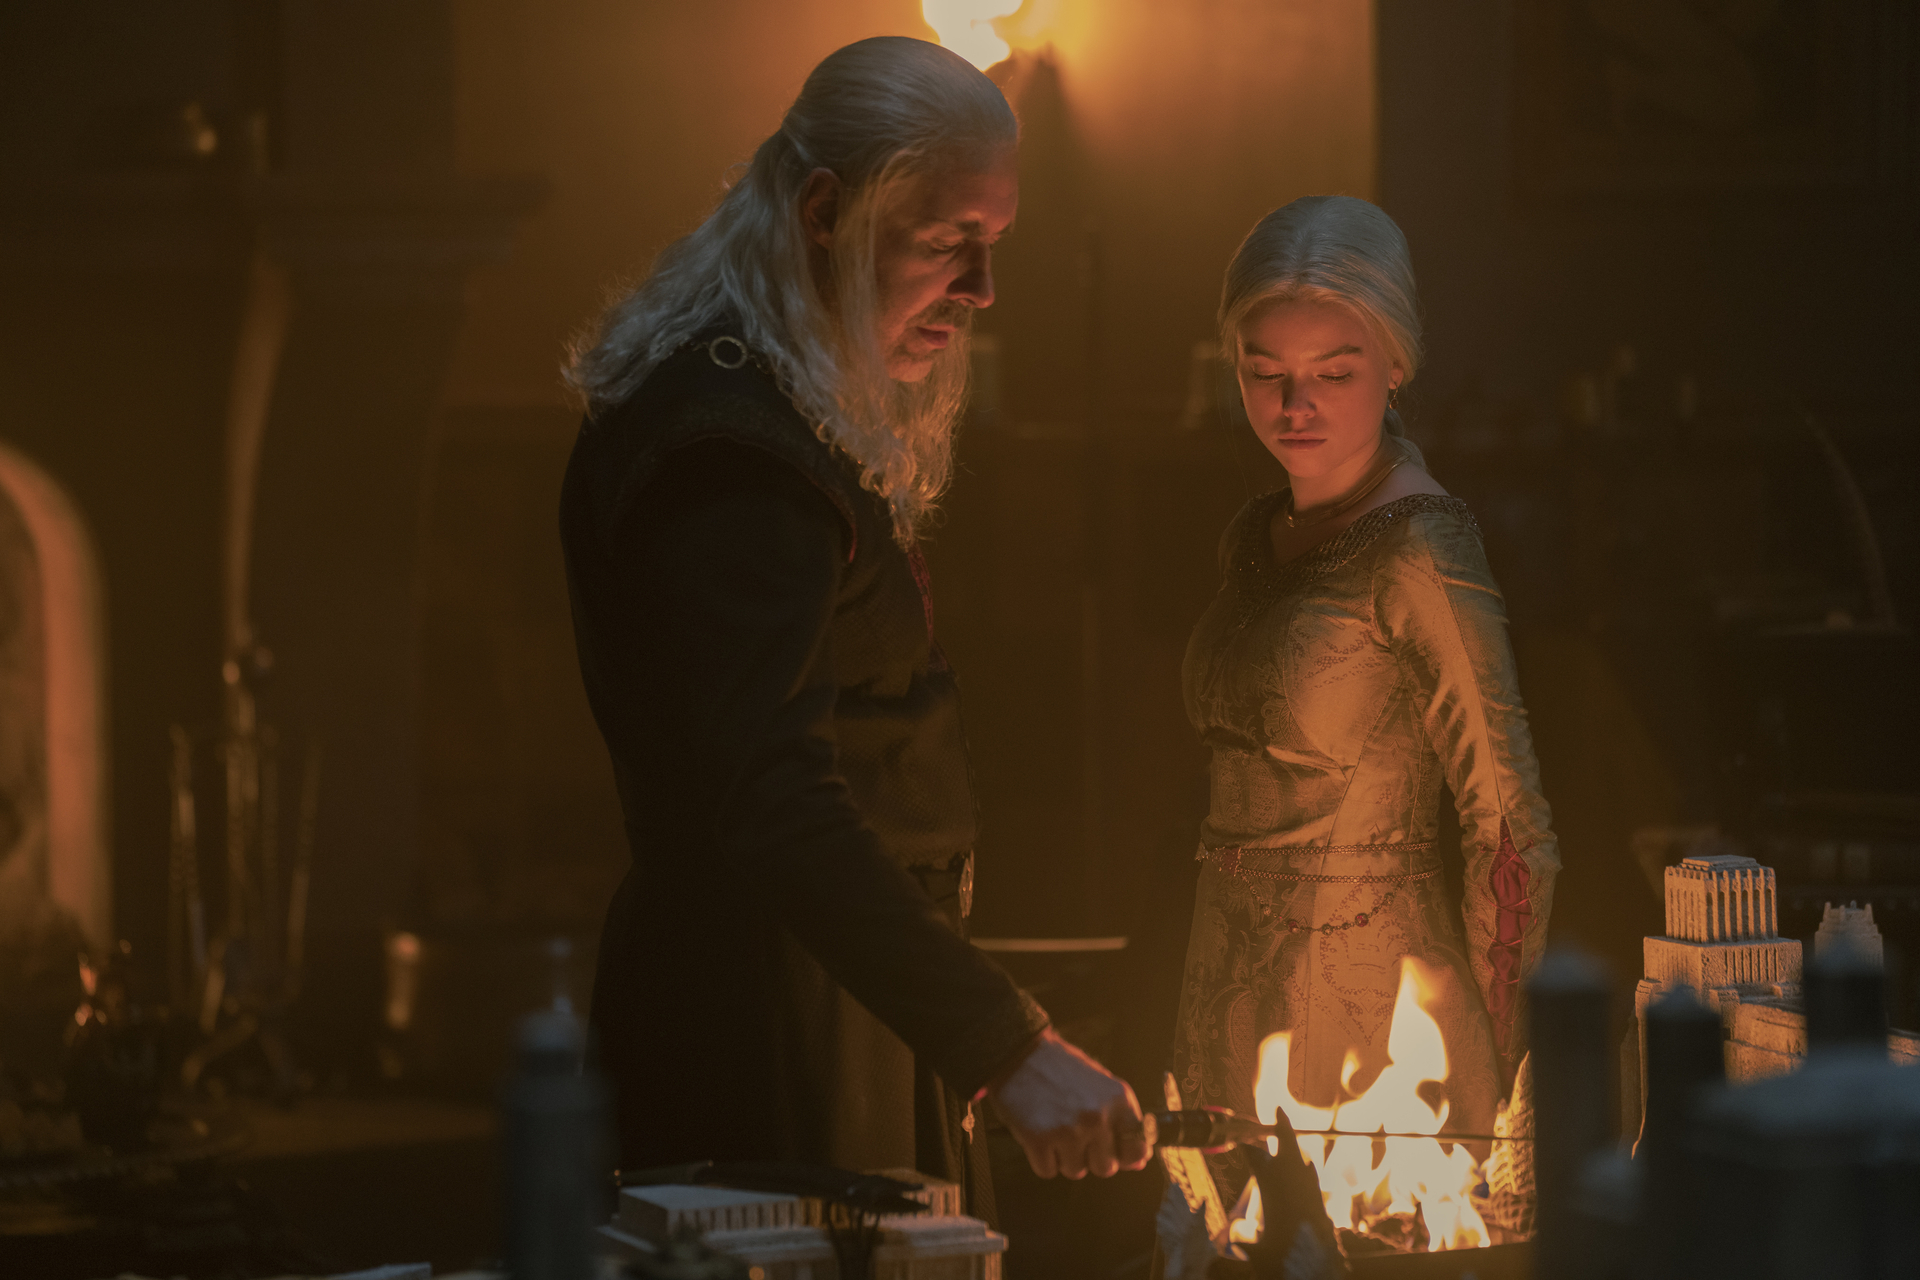 Viserys (Paddy Considine), Young Rhaenyra (Milly Alcock), Catspaw Valyrian Steel Dagger, Aegon's Song of Ice and Fire Prophecy, Balerion Skull Room 1x04